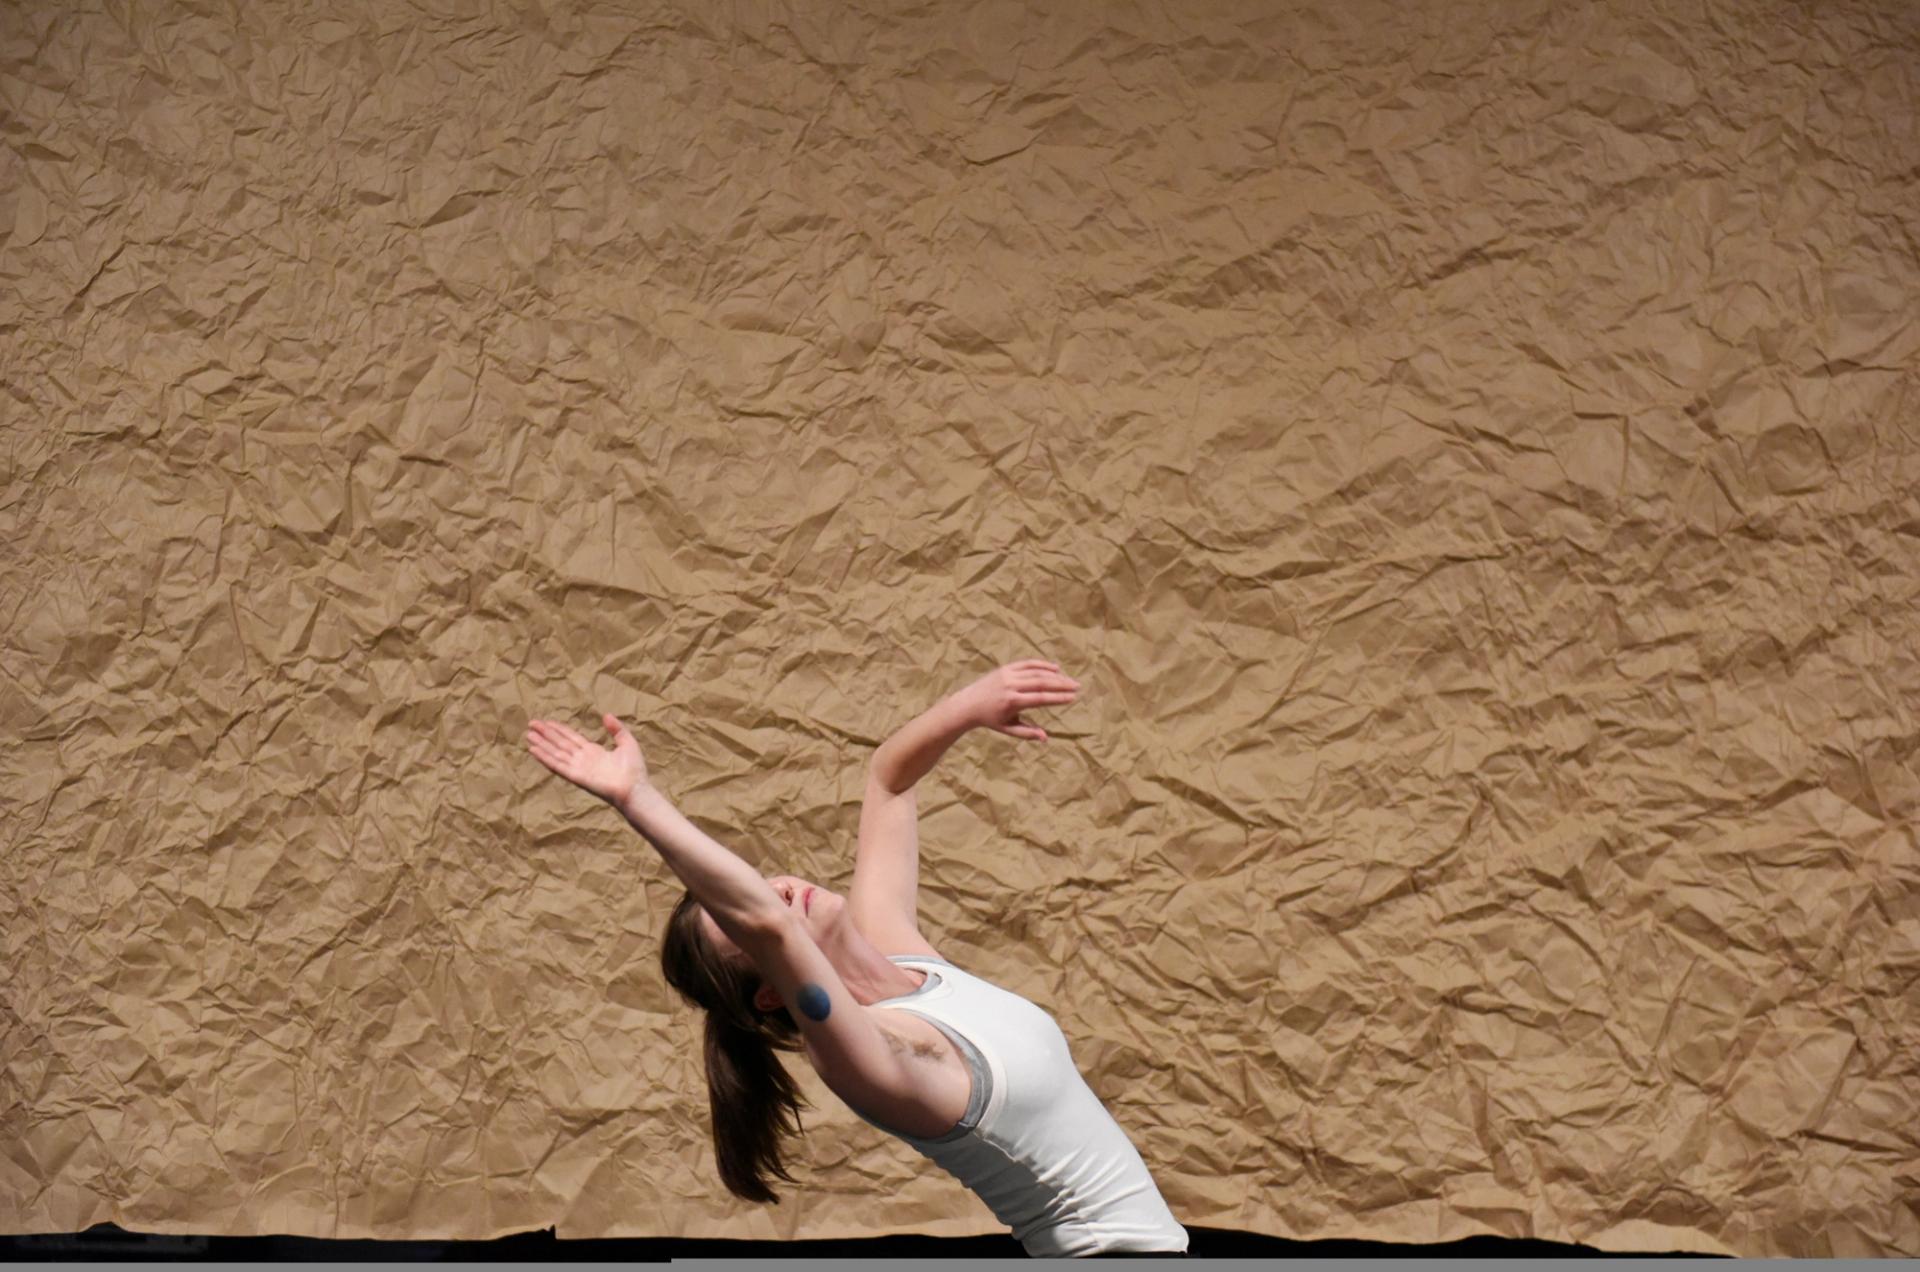 Chloe is leaning backwards, her hand covering her face in the middle of a dance. Only her upper body is visible, against a wrinkled  brown paper backdrop. 